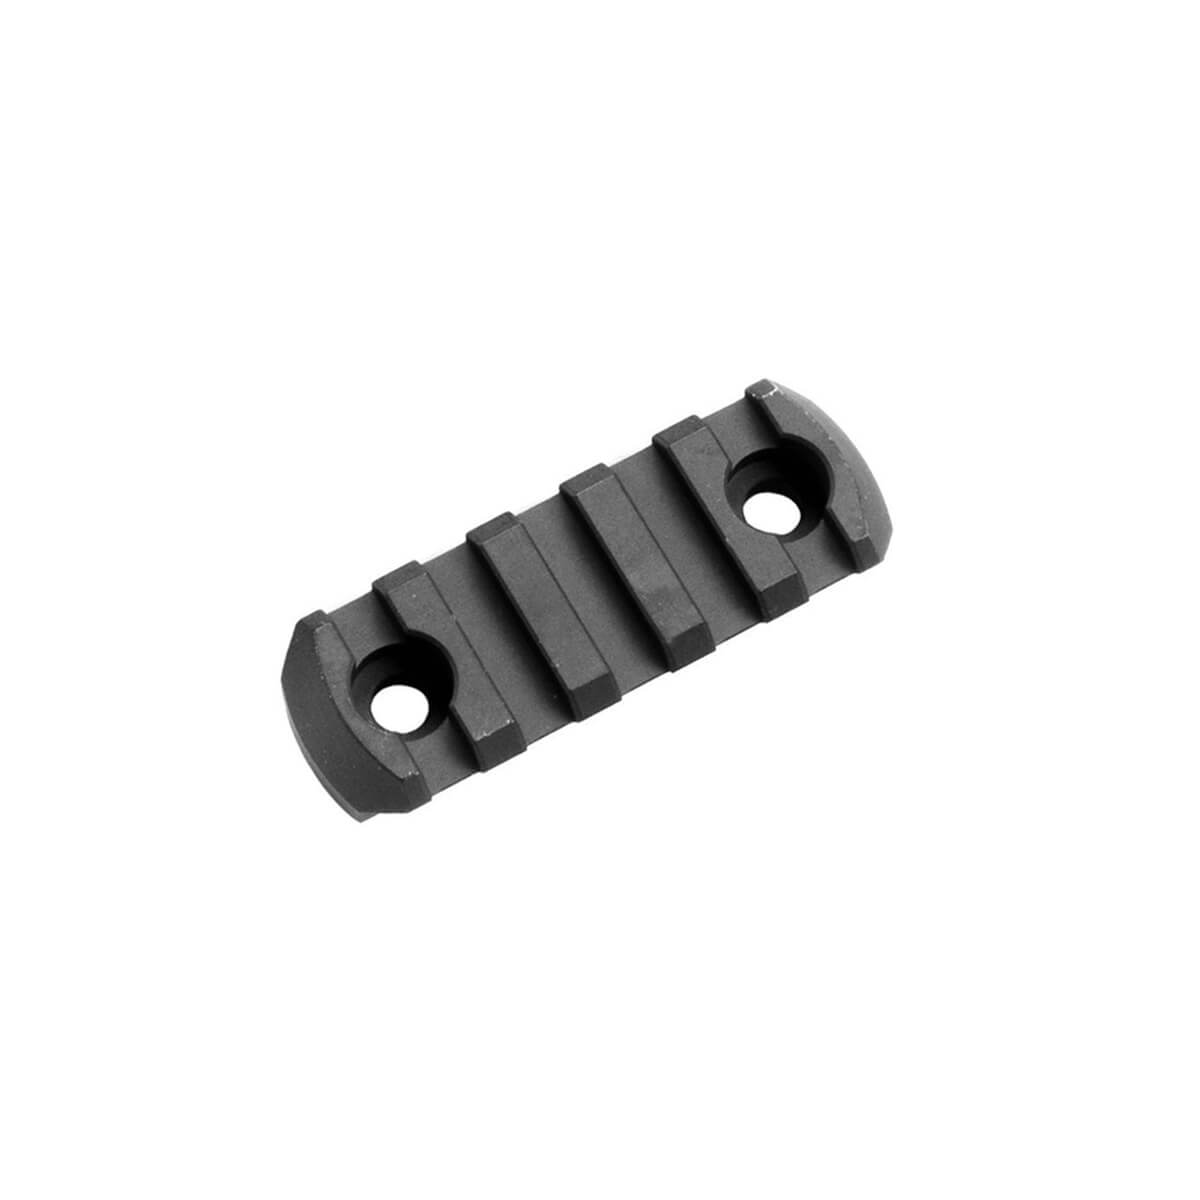 Pac Gotical 5 Slots M-LOK Polymer Rail Section for M Lok Handguard Three Slots Rail Picatinny Rail Set of 2 Pieces Polymer Material Import from Japan 